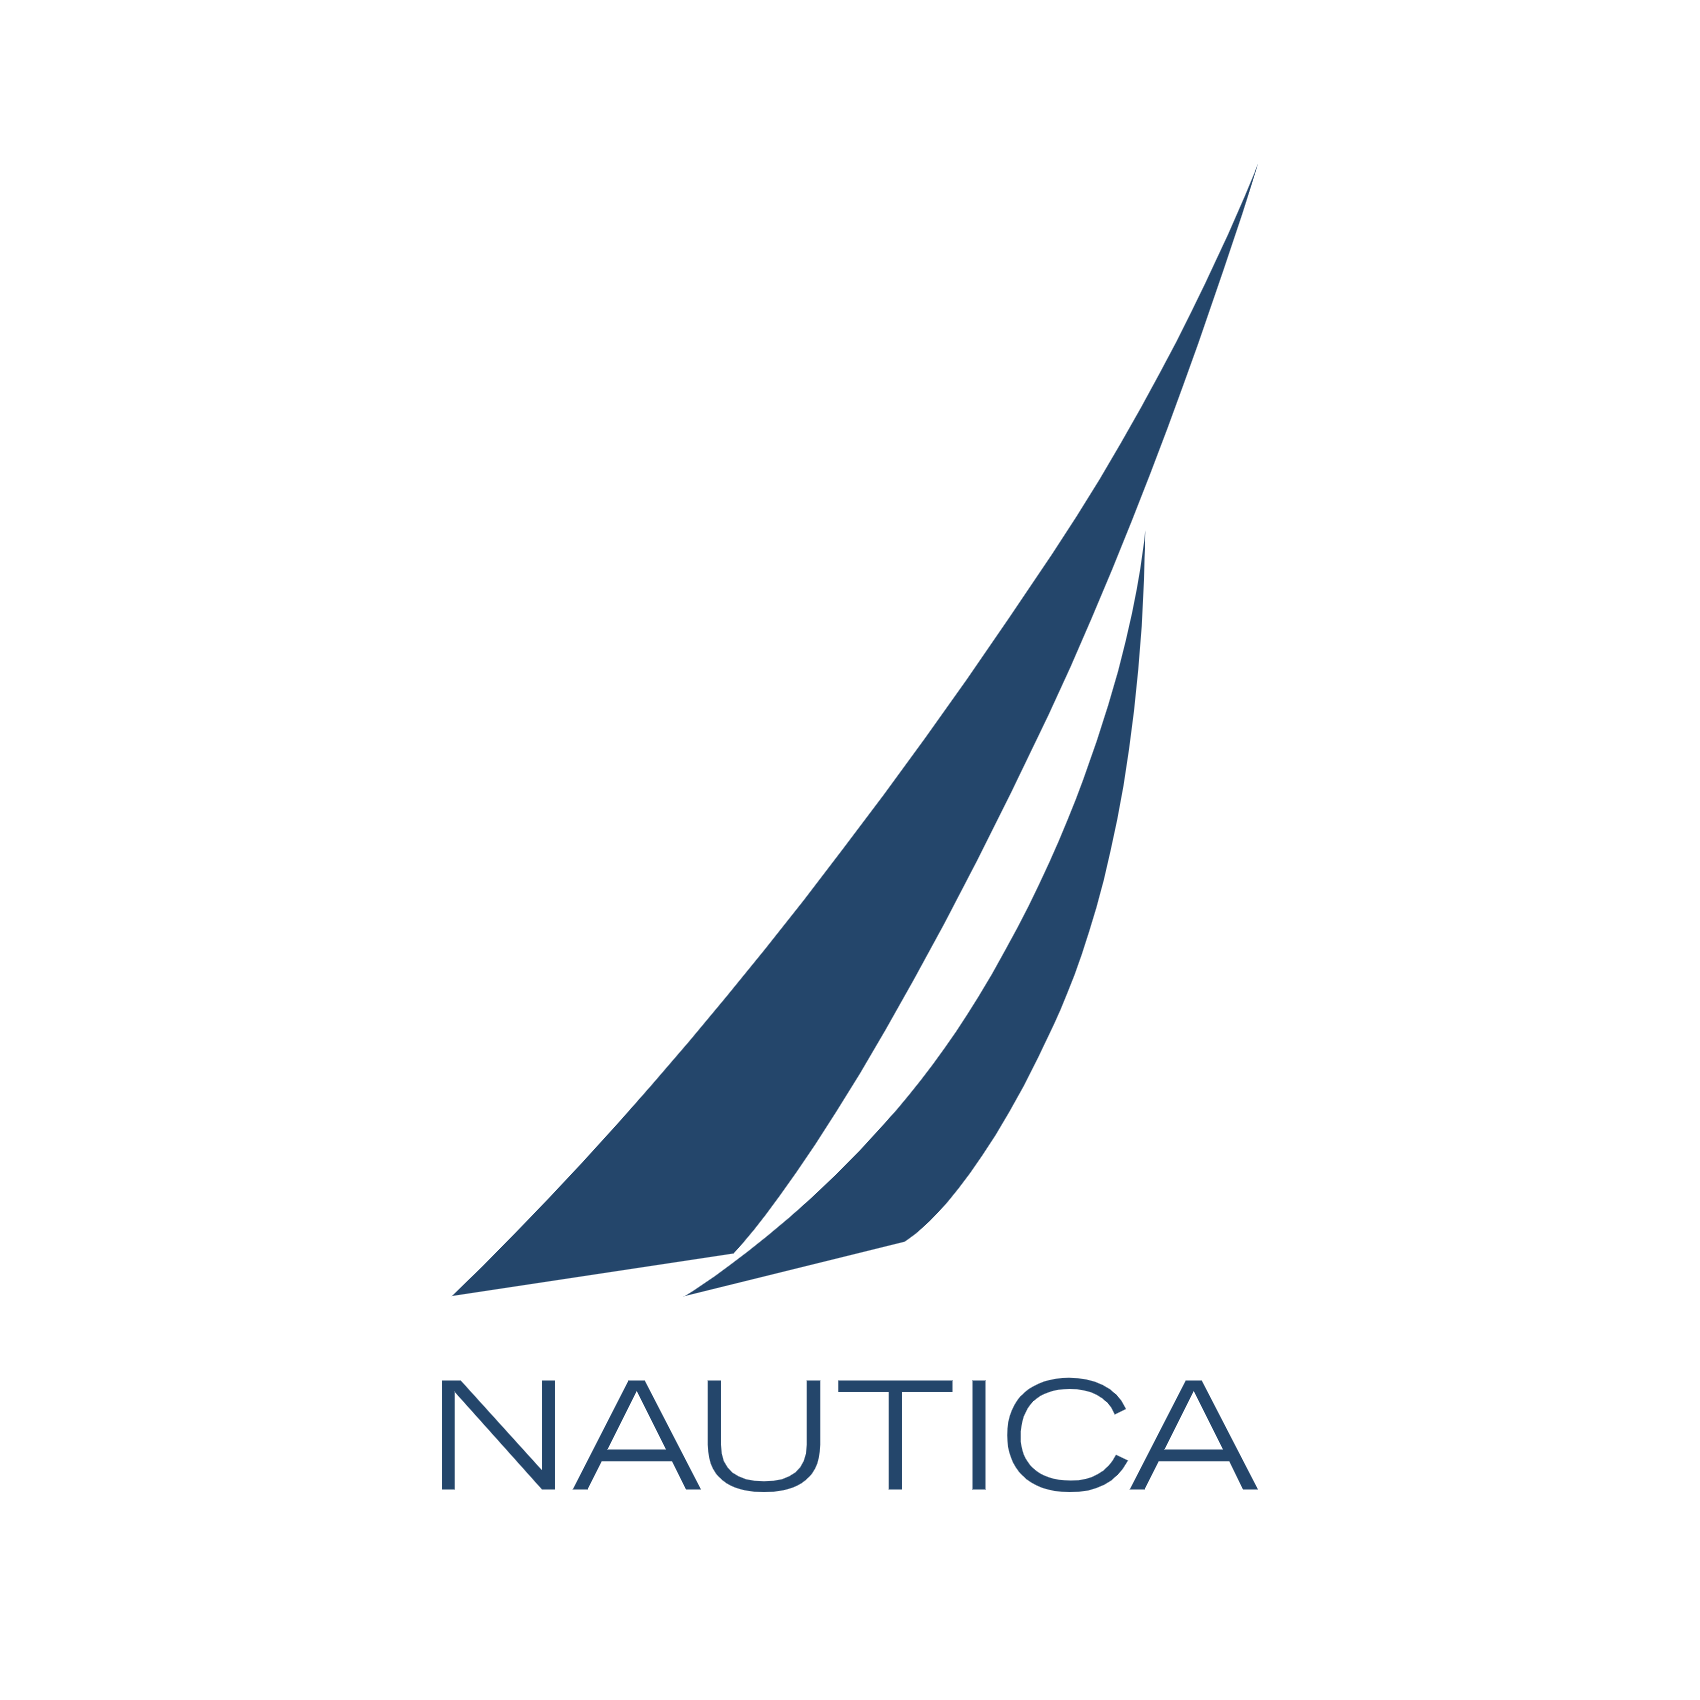 Download Nautica Logo PNG and Vector (PDF, SVG, Ai, EPS) Free